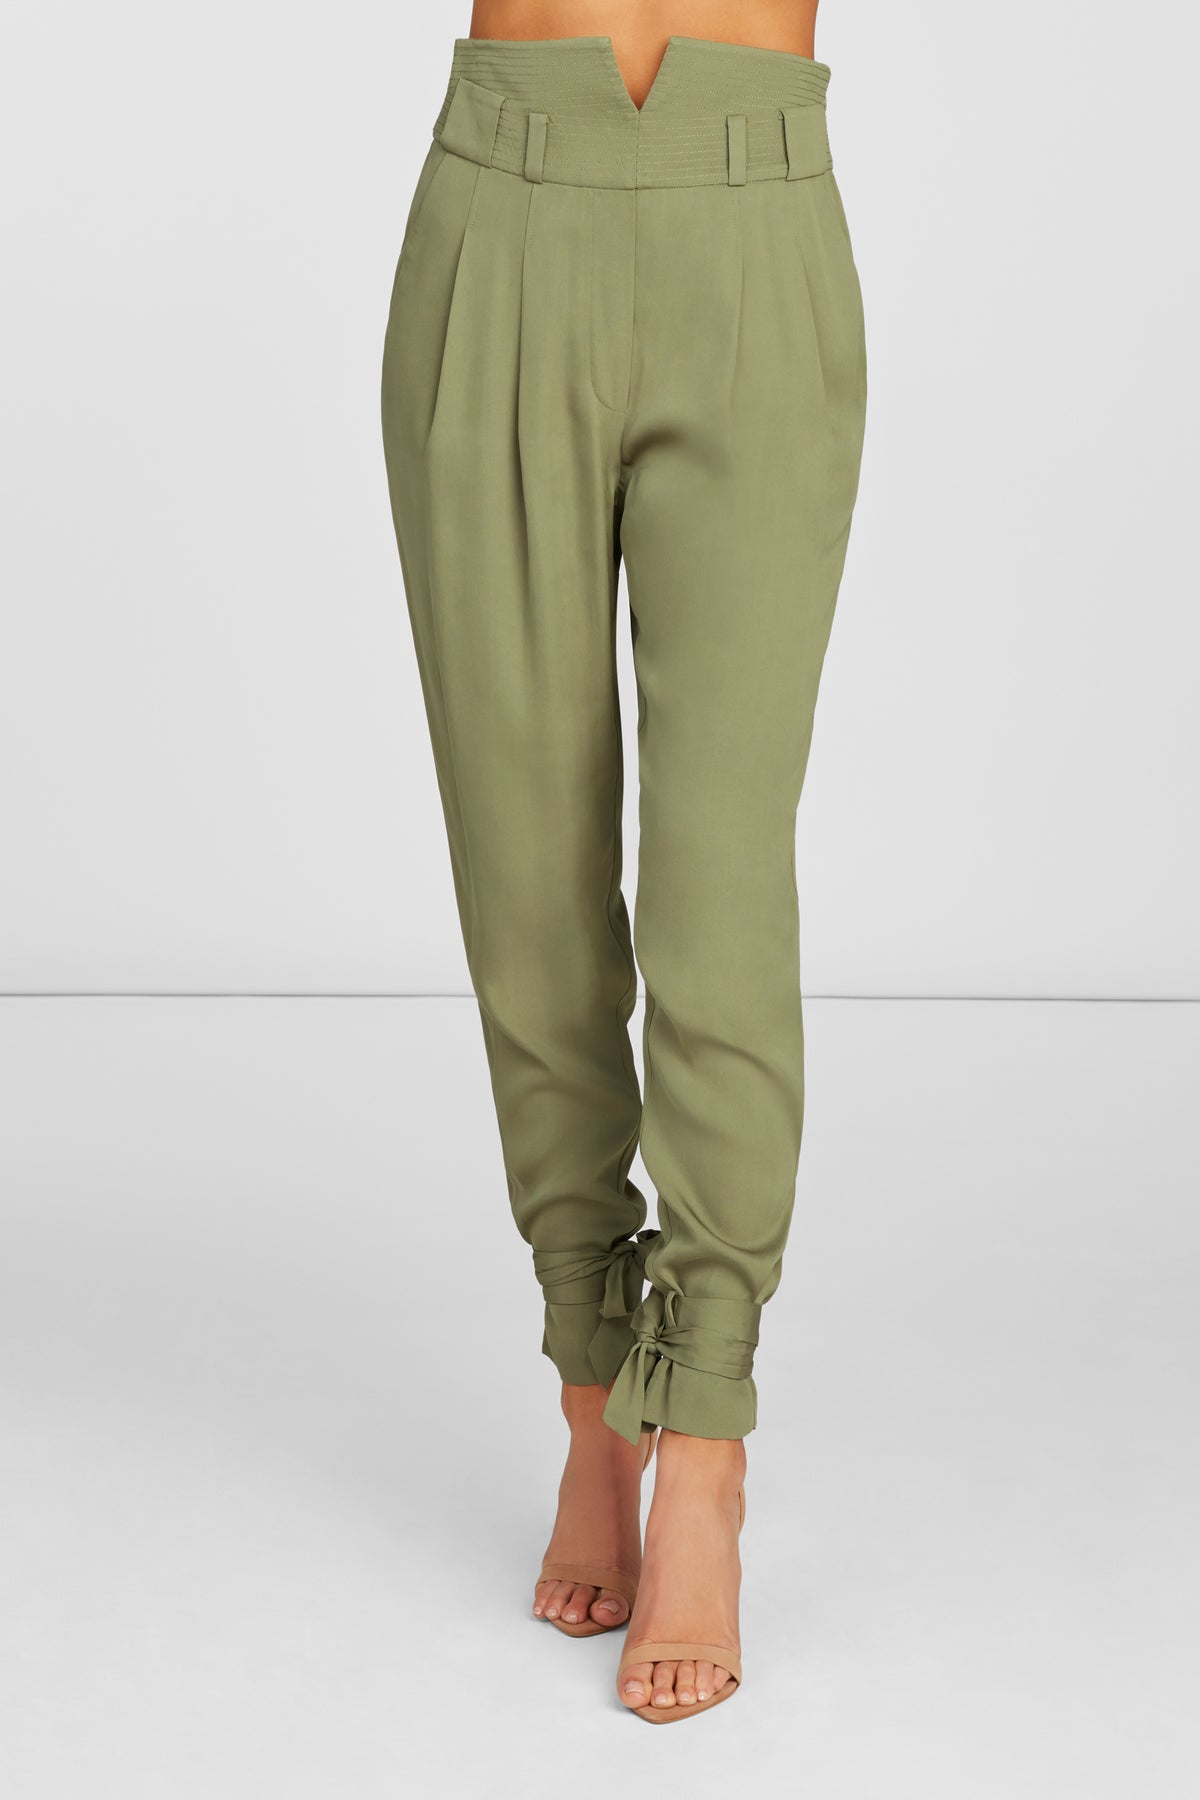 Aria High Waisted Skinny Pants in Olive